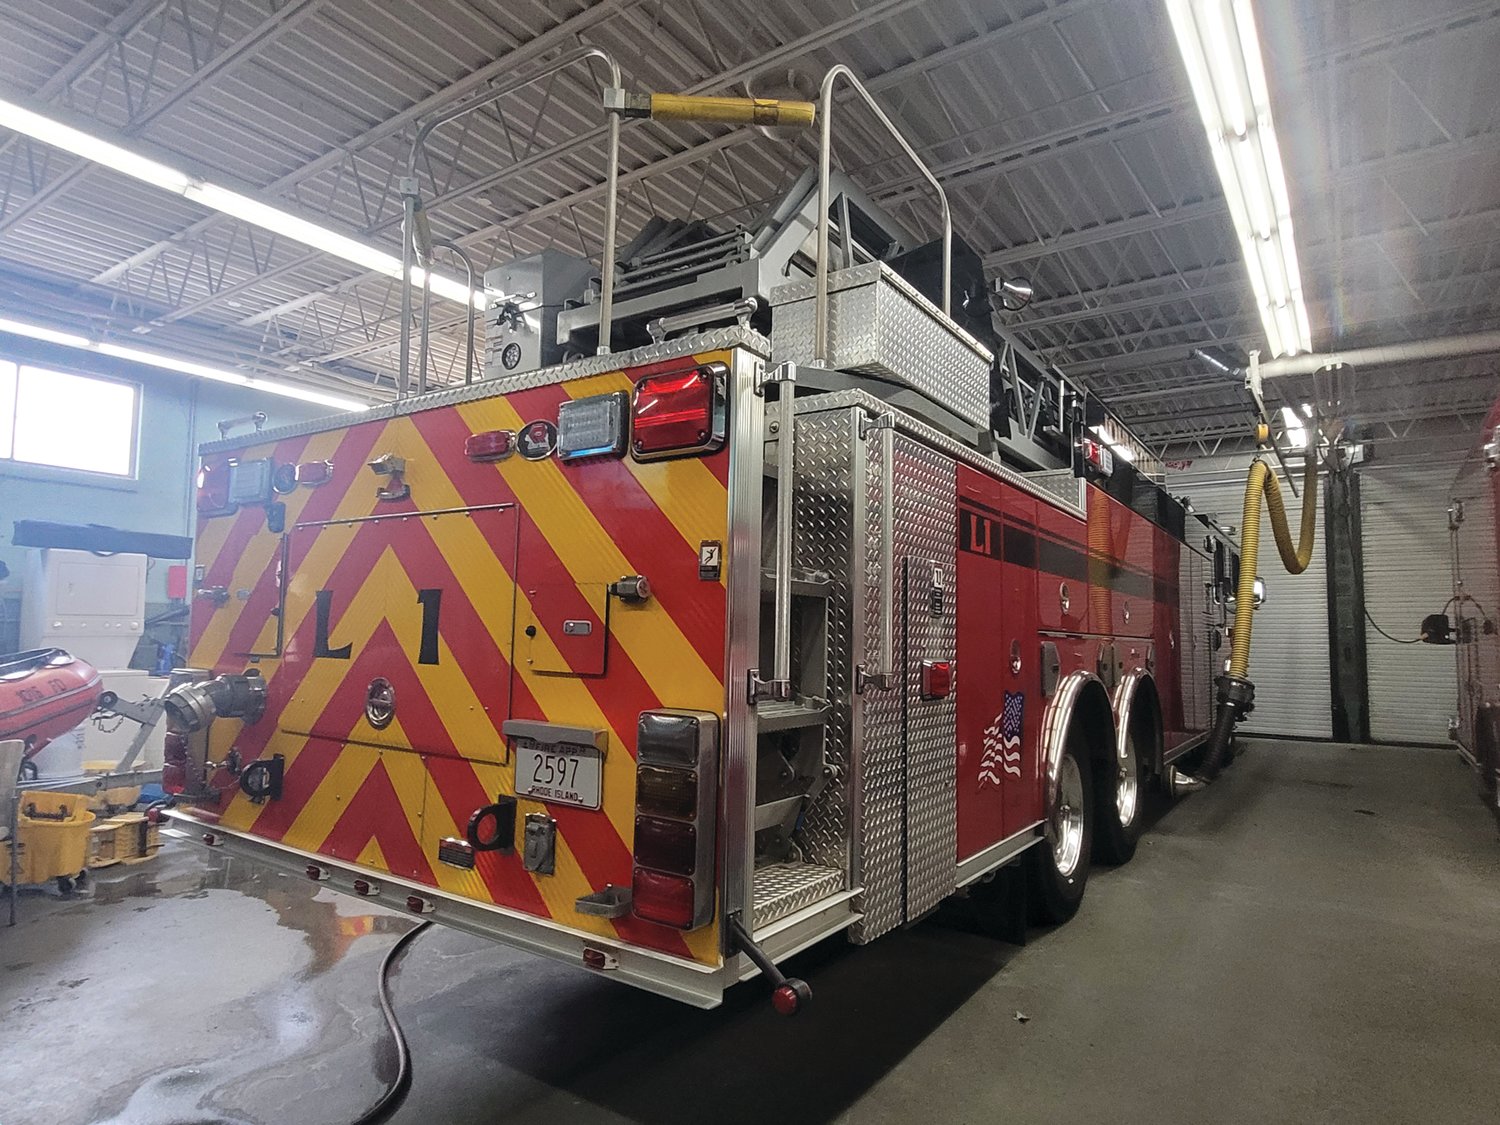 NEW TRUCK, OLD TRUCK: The Johnston Fire Department’s ladder truck will be put on reserve status once the town receives its new truck. The old truck has only been in service for less than eight years.